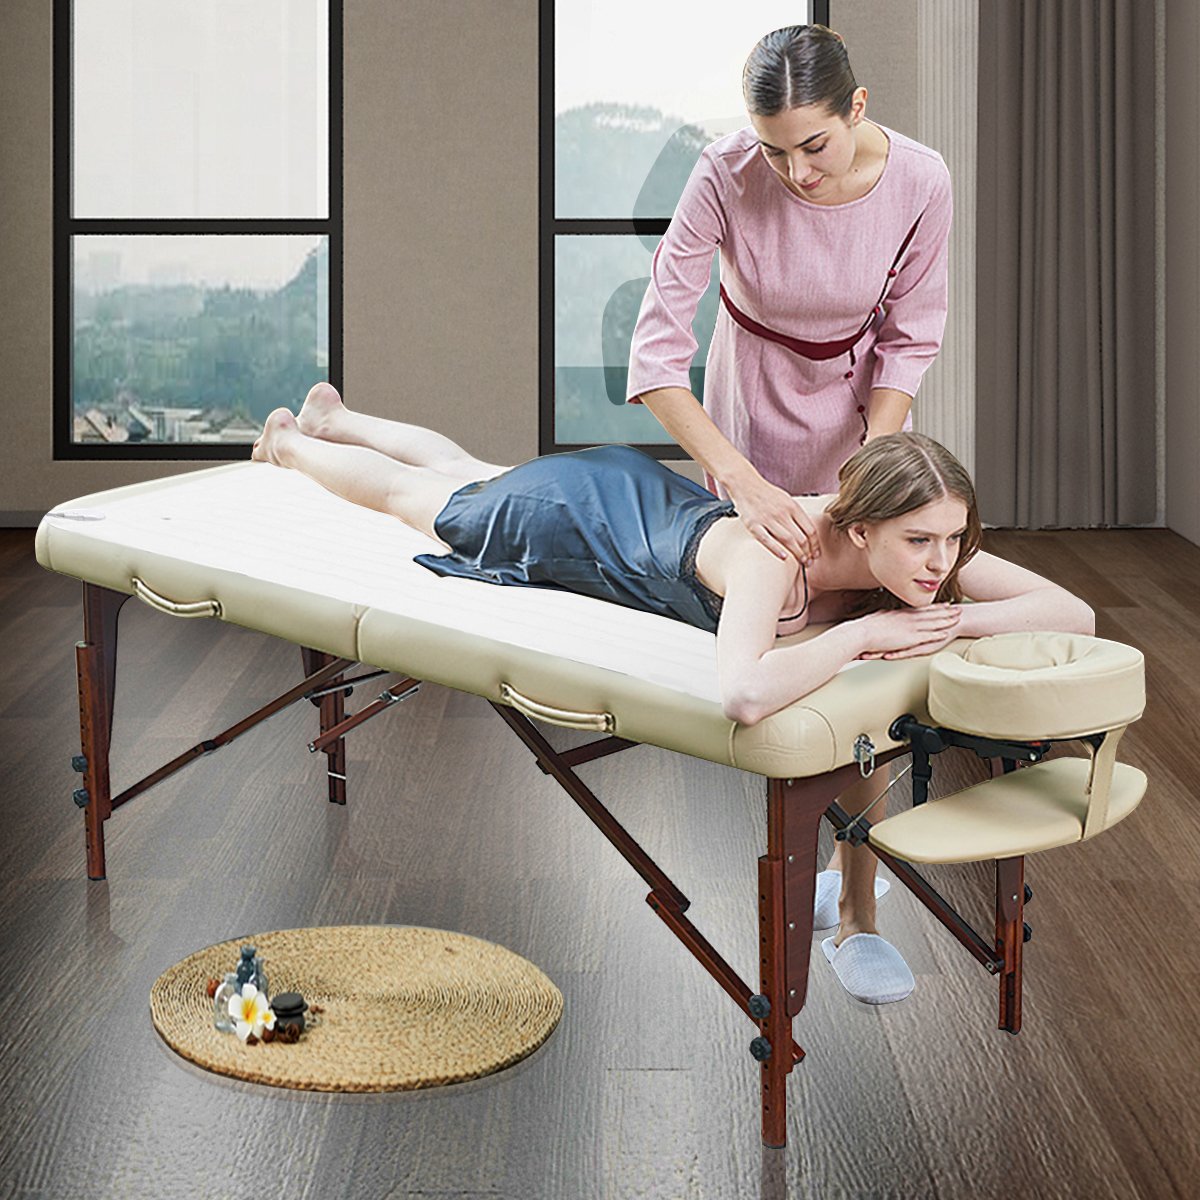 Digital Auto Overheat Protection Massage Table Warmer at Gallery Canada